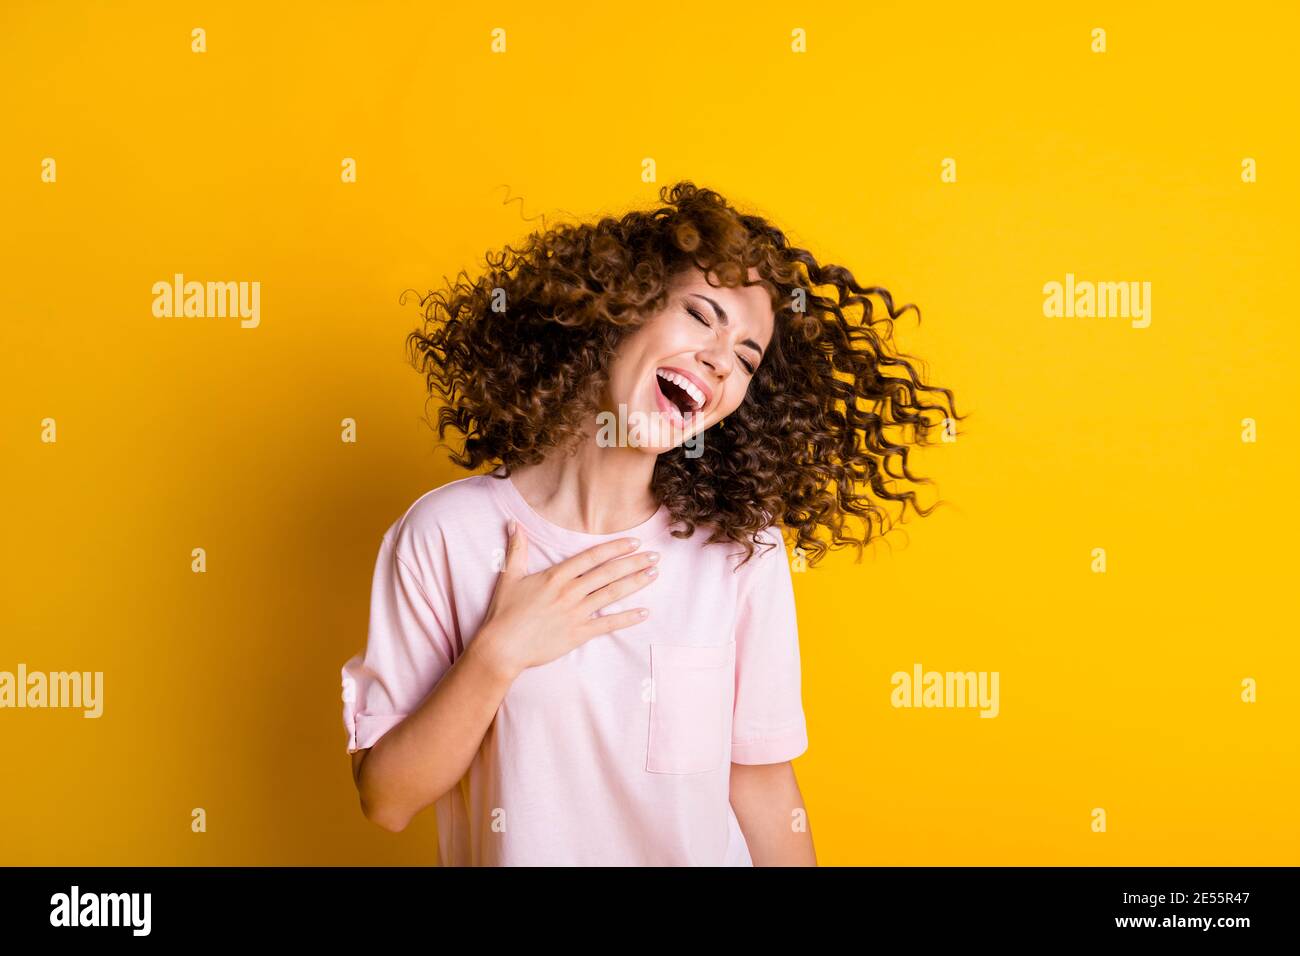 Photo portrait of woman laughing touching chest with one hand flying hair isolated on vivid yellow colored background Stock Photo